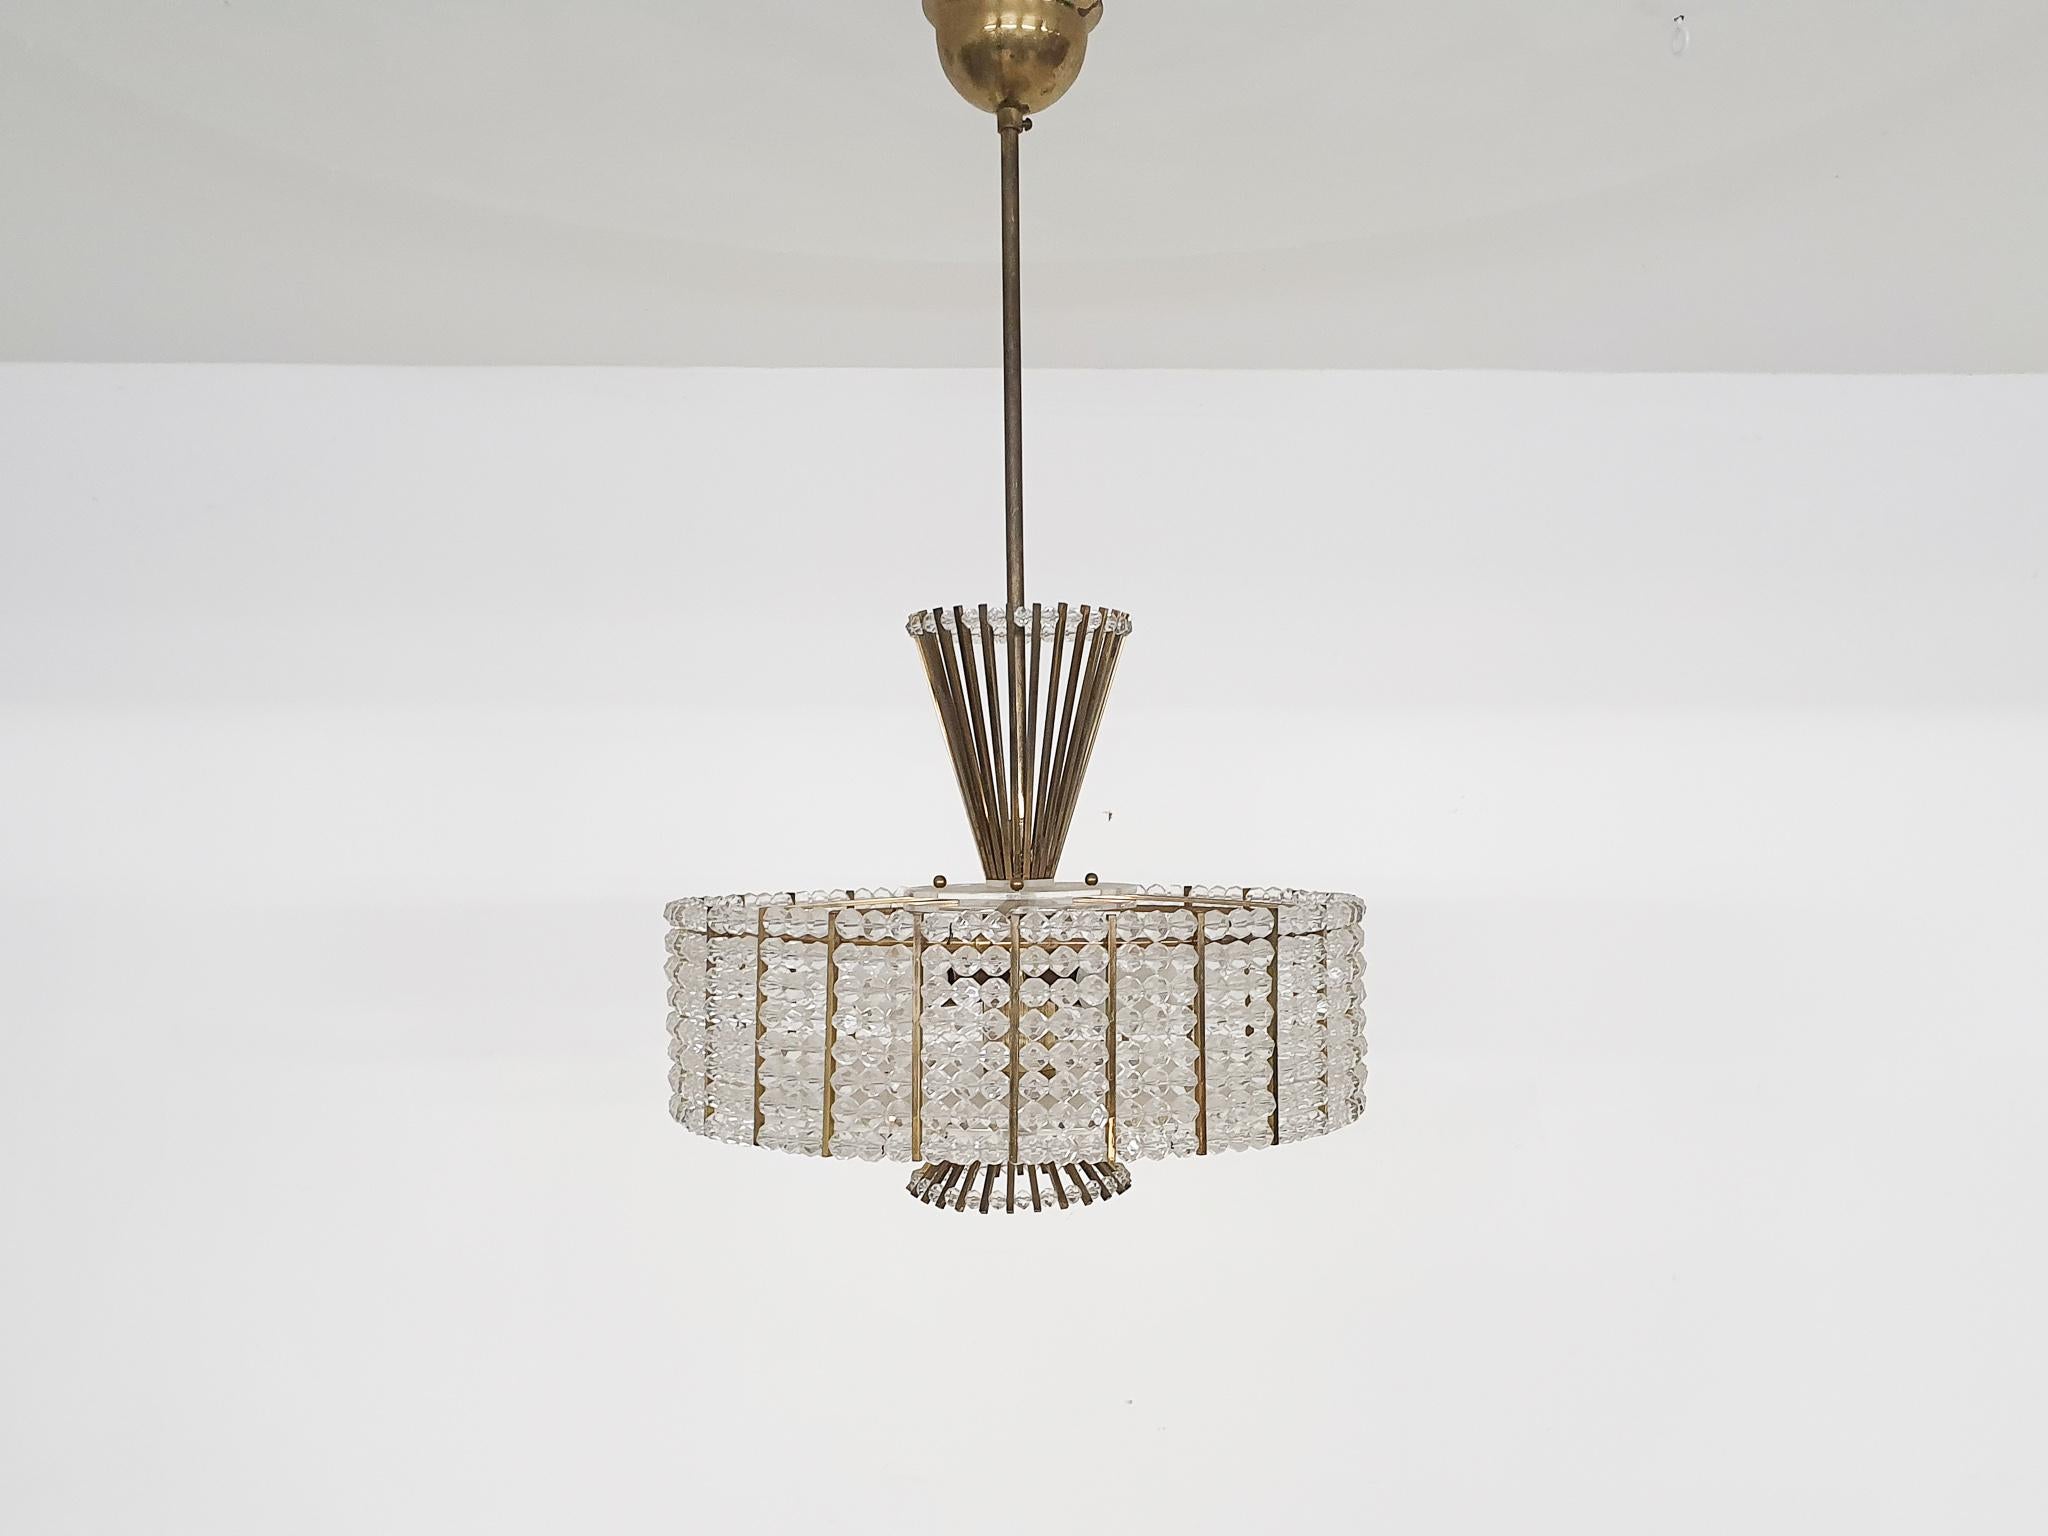 Brass and glass chandelier by Emil Stejnar for Rupert Nikoll.
With five E14 light bulbs
Stejnar was born in Vienna, Austria in 1939 and trained as a gold and silversmith. After his study of the stars and the Occult in Sweden he went back to Vienna